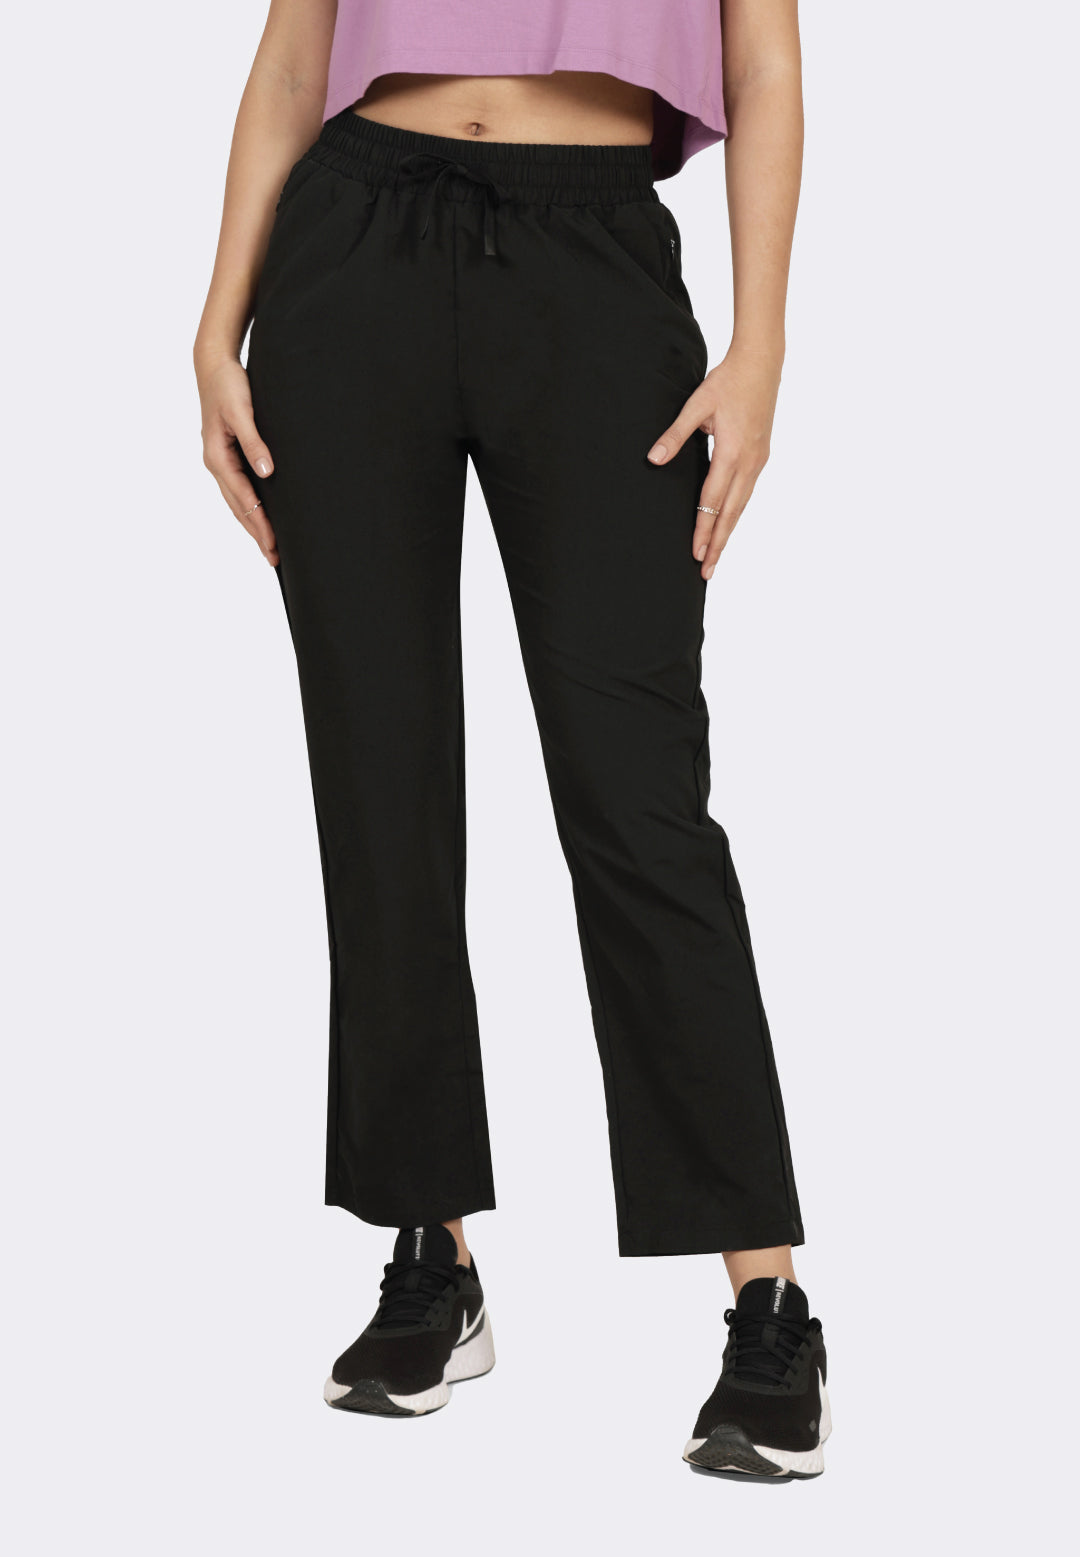 Buy Plus Size Track Pants for Women Online from Blissclub